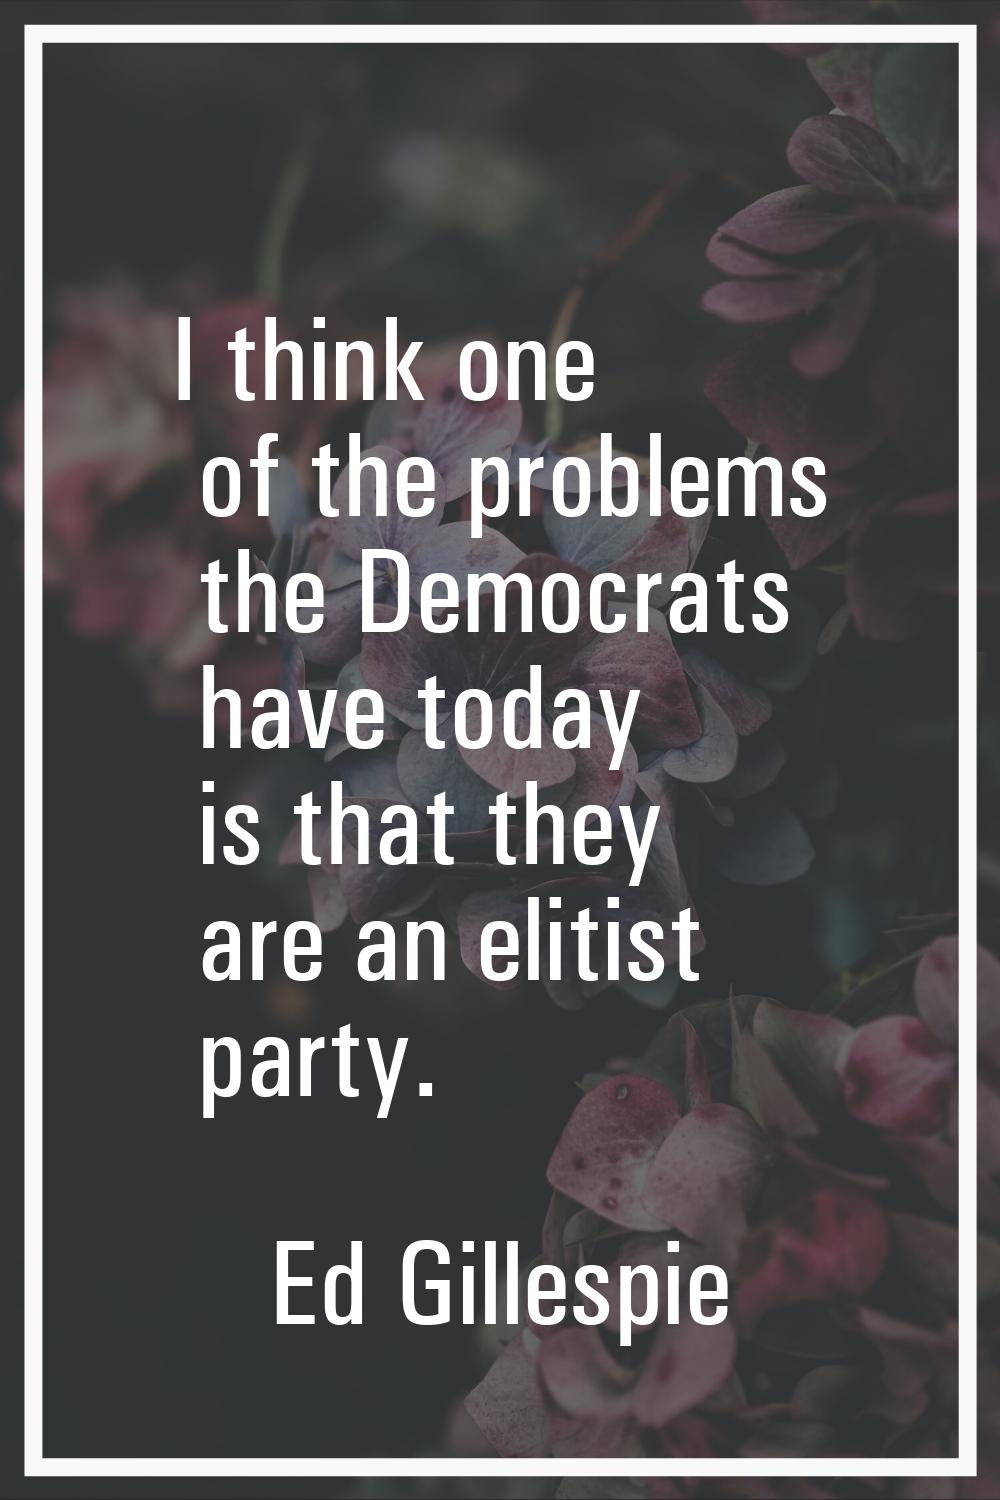 I think one of the problems the Democrats have today is that they are an elitist party.